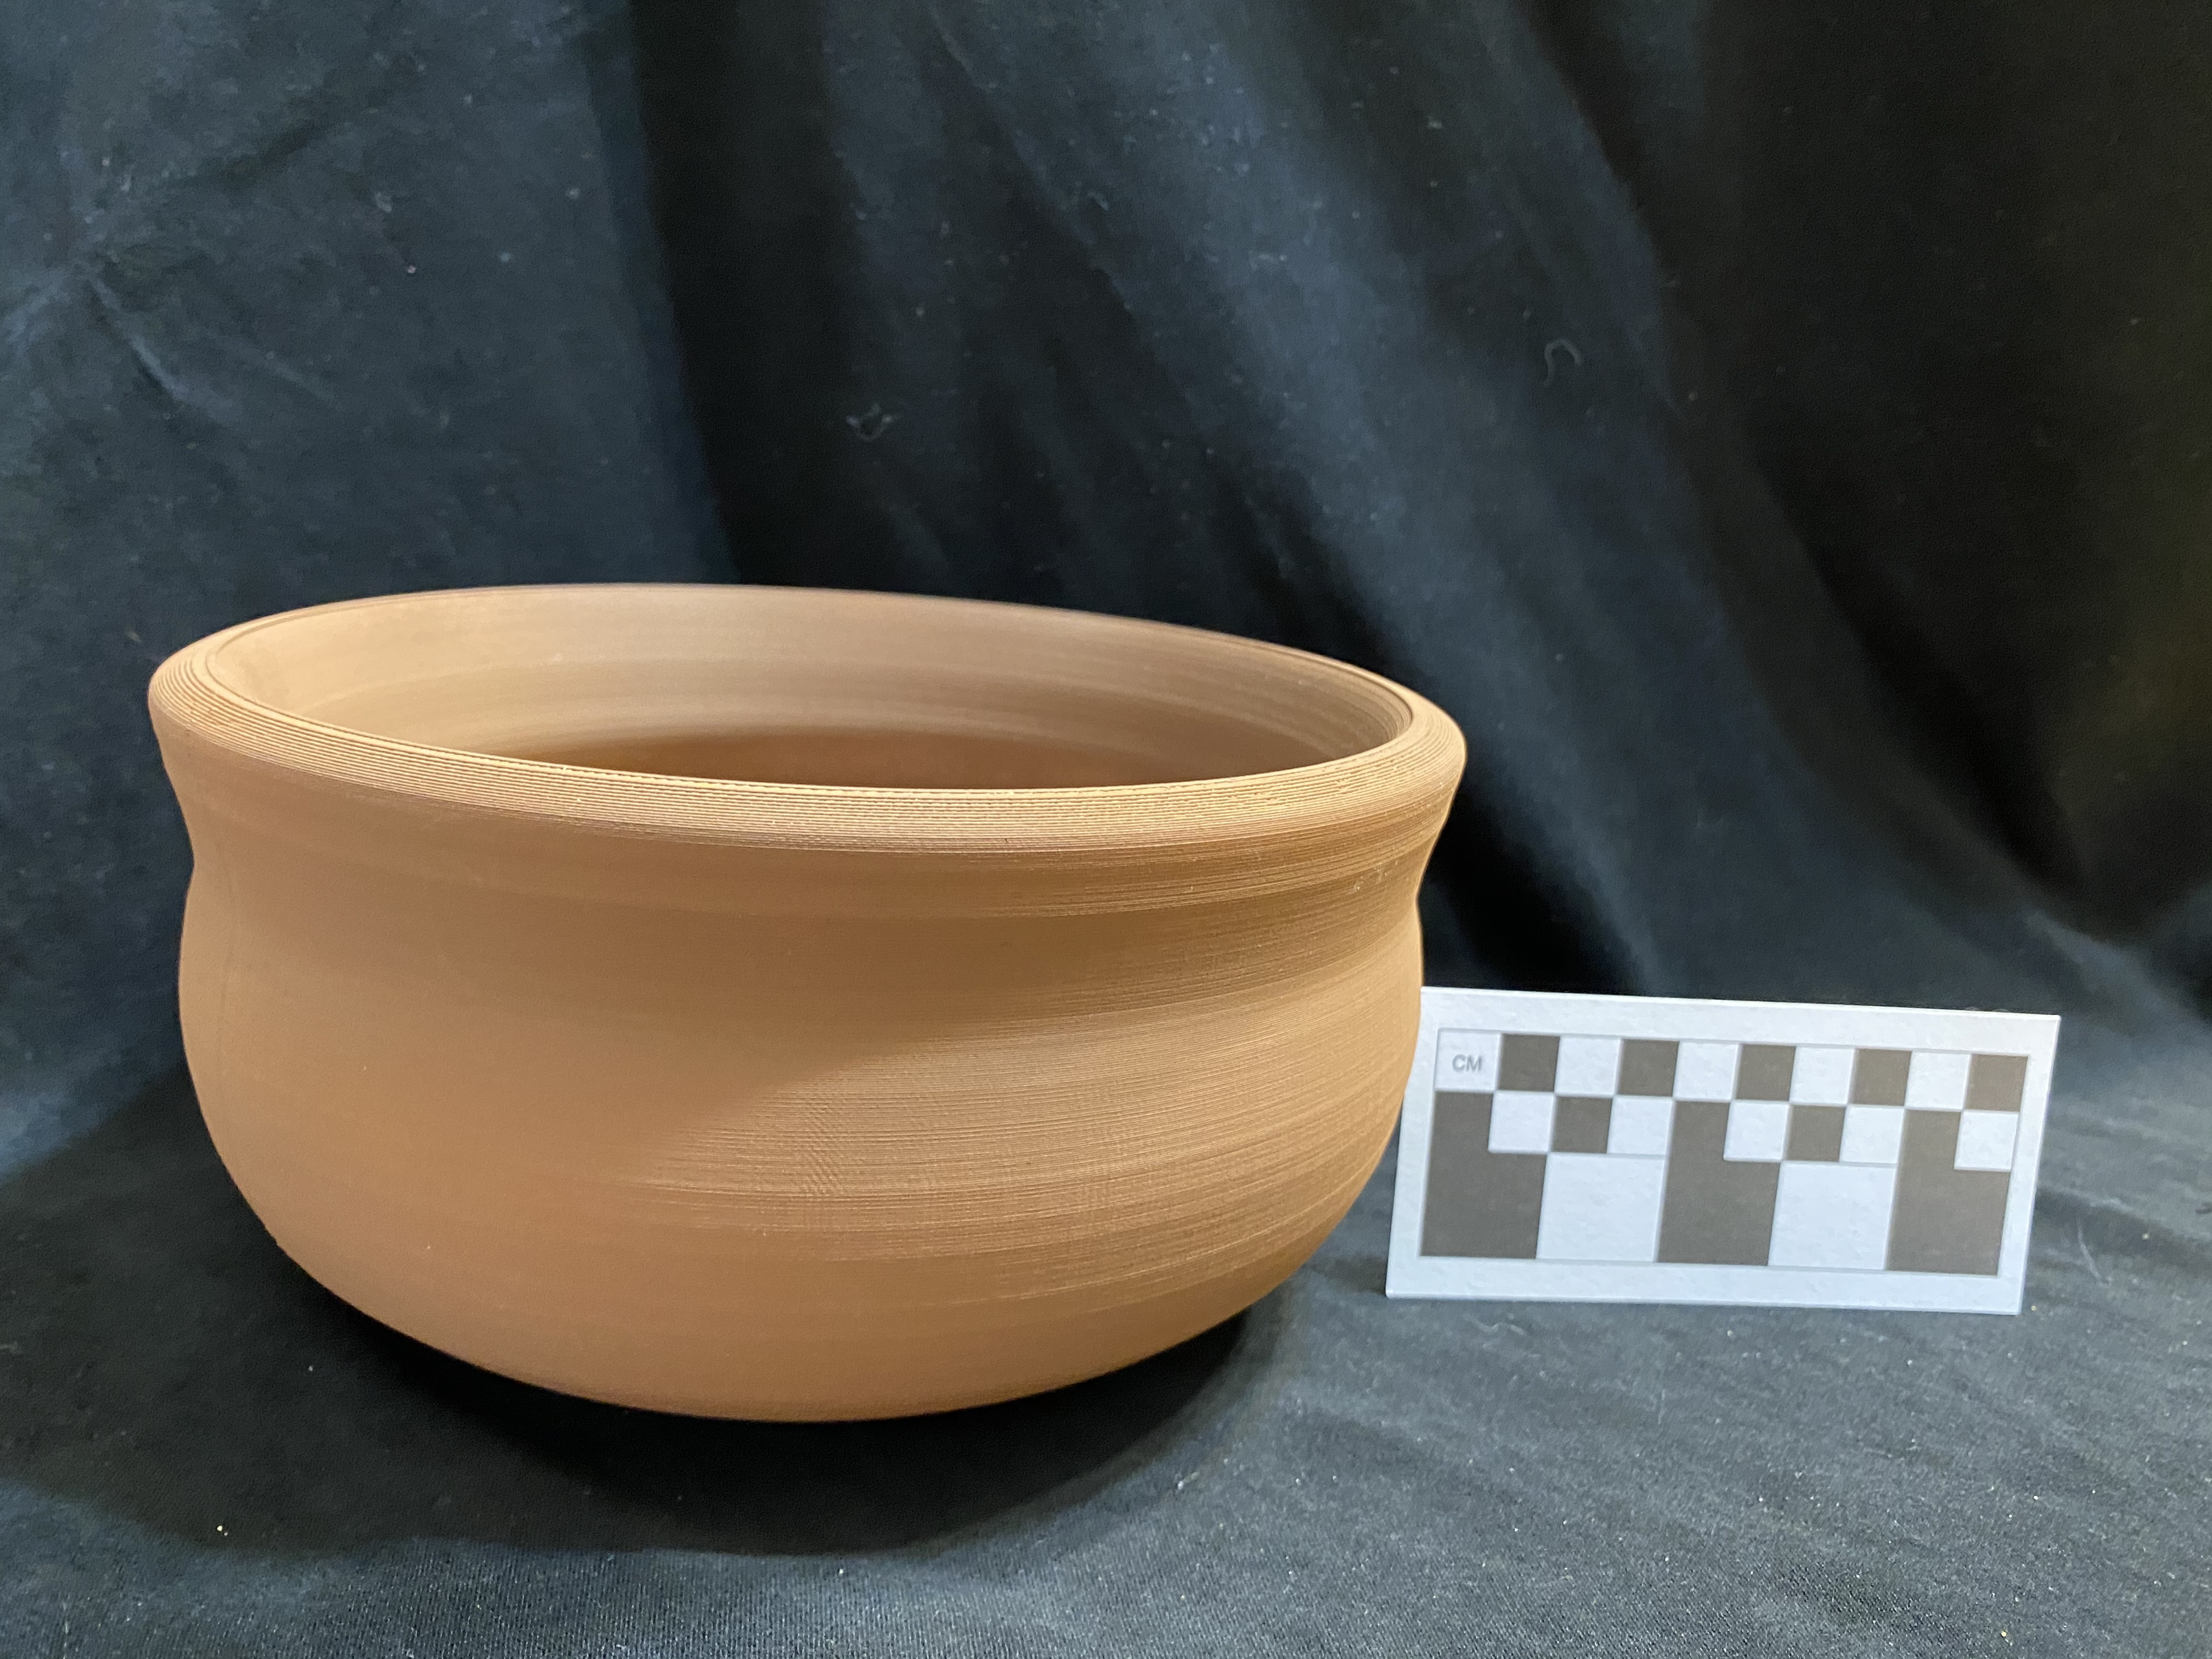 3D printed pottery by LSU archeology students